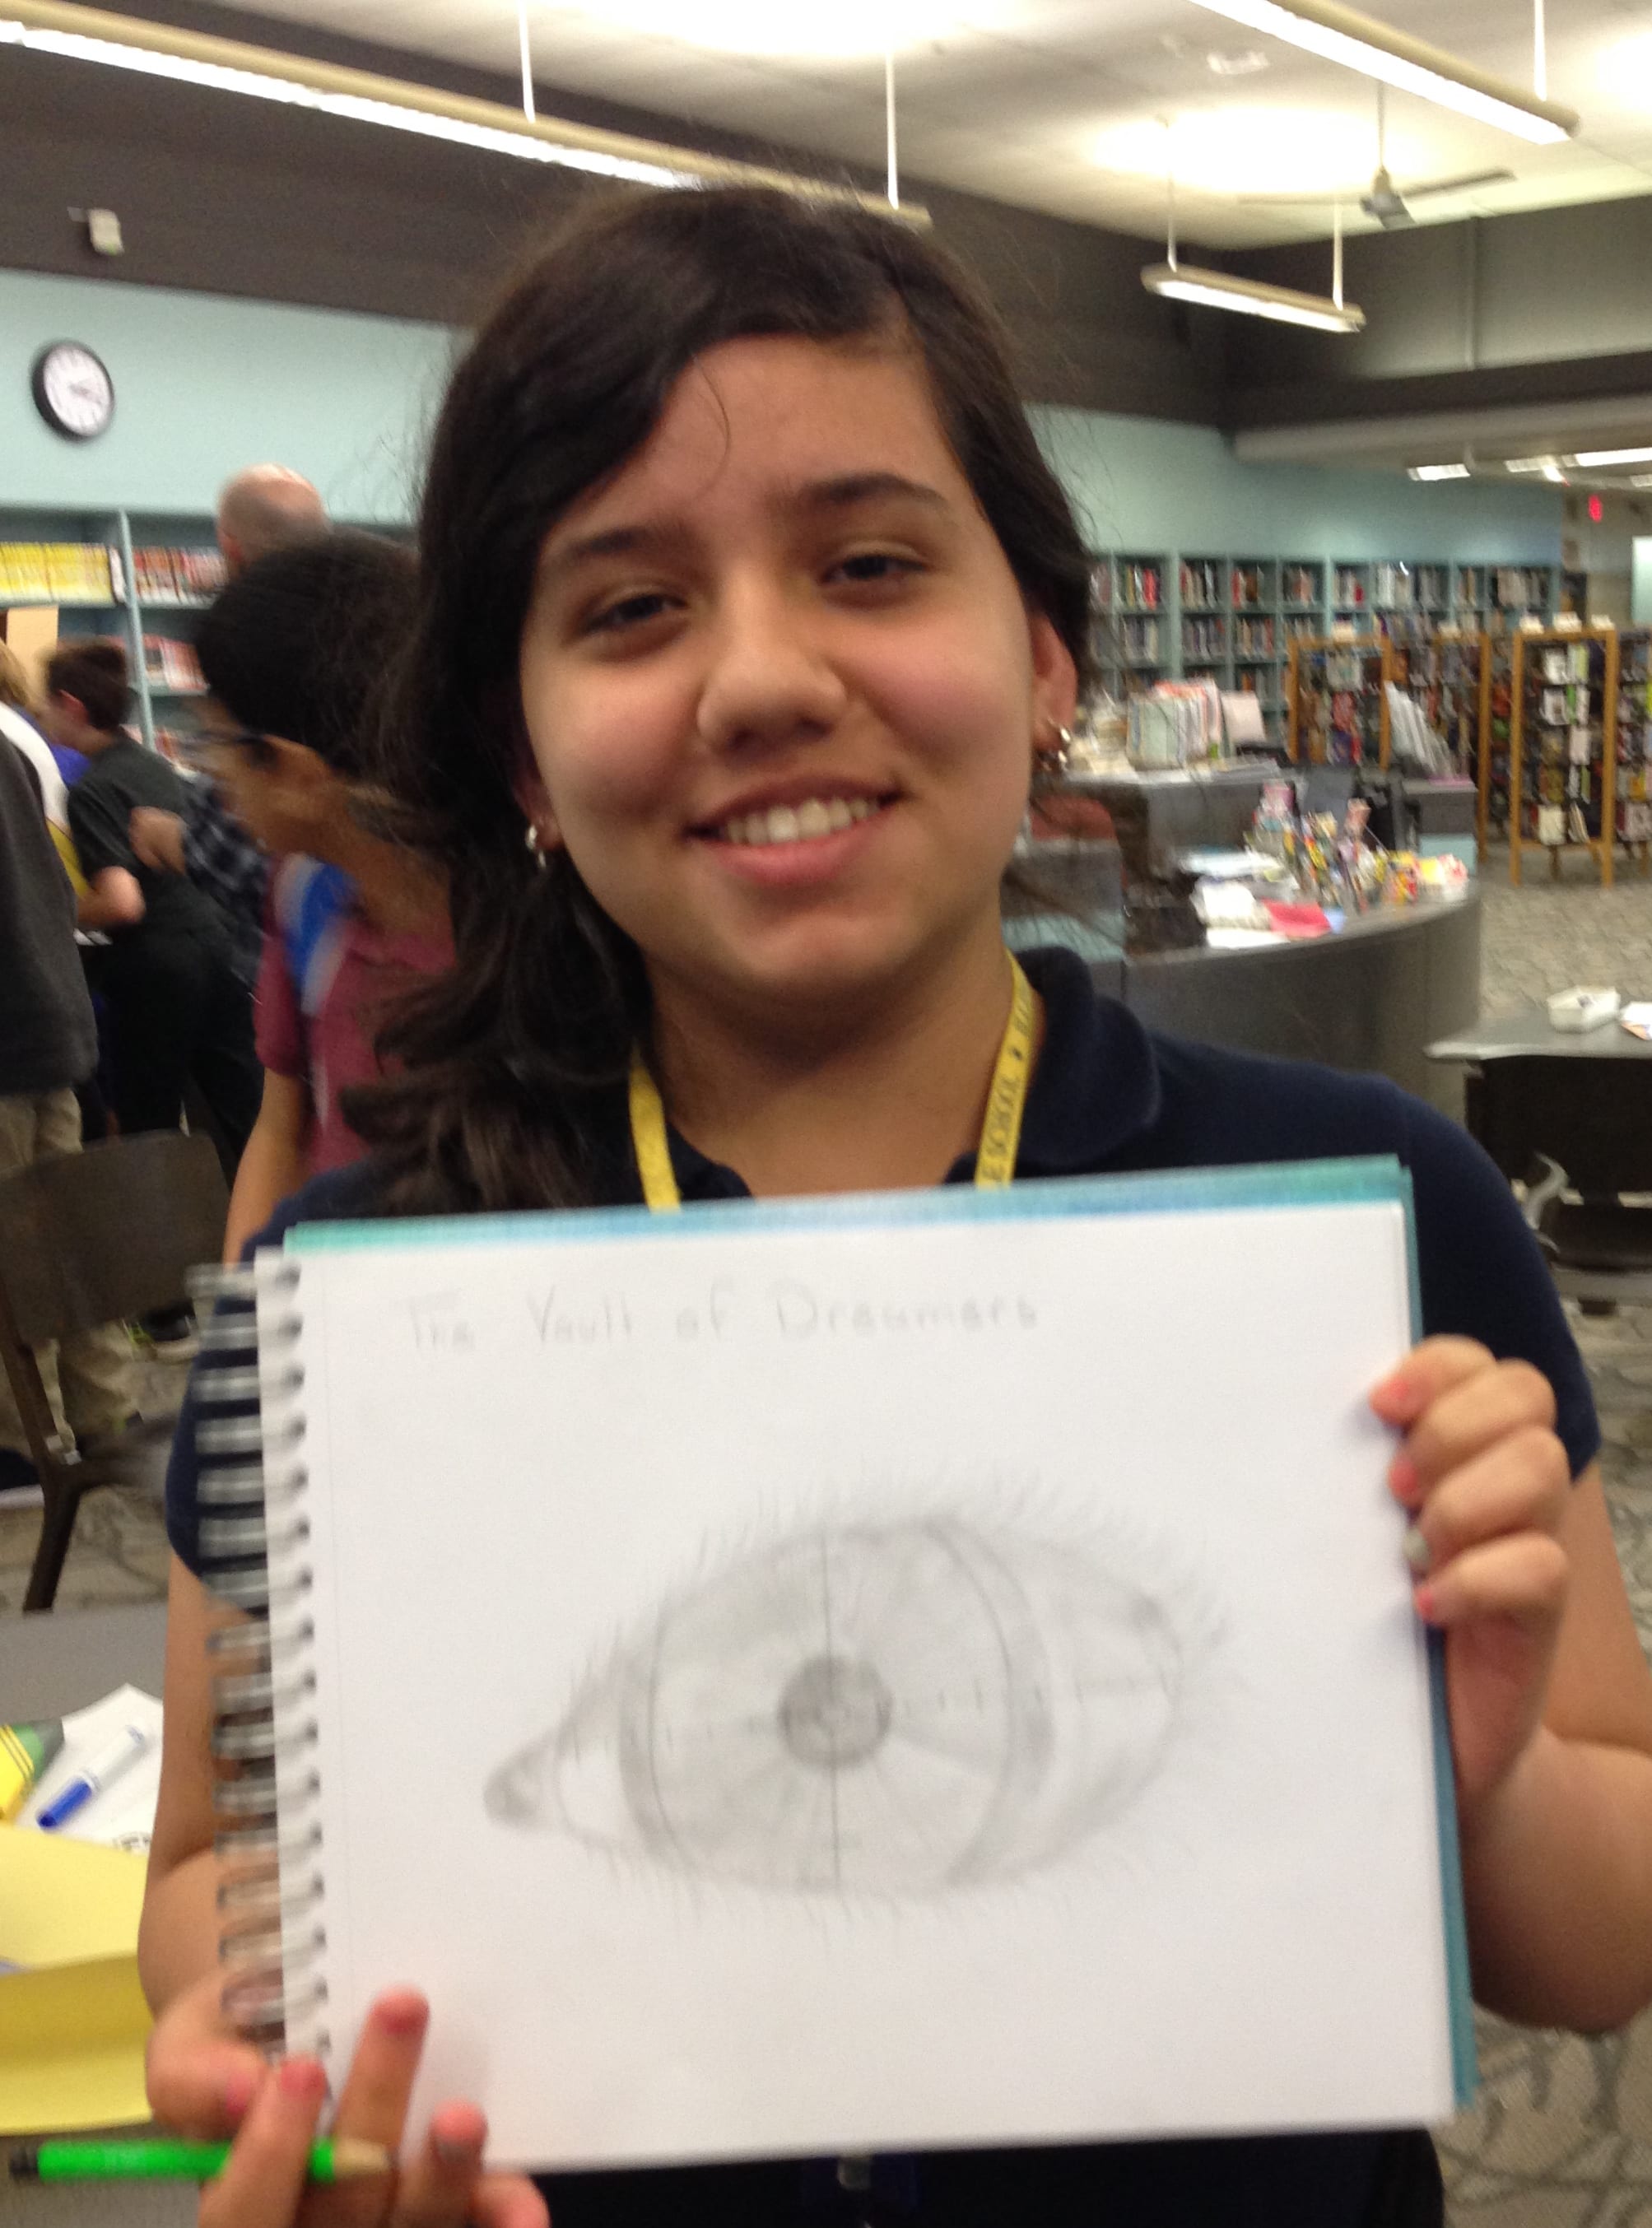 Artist S. H. shares her drawing inspired by The Vault of Dreamers.